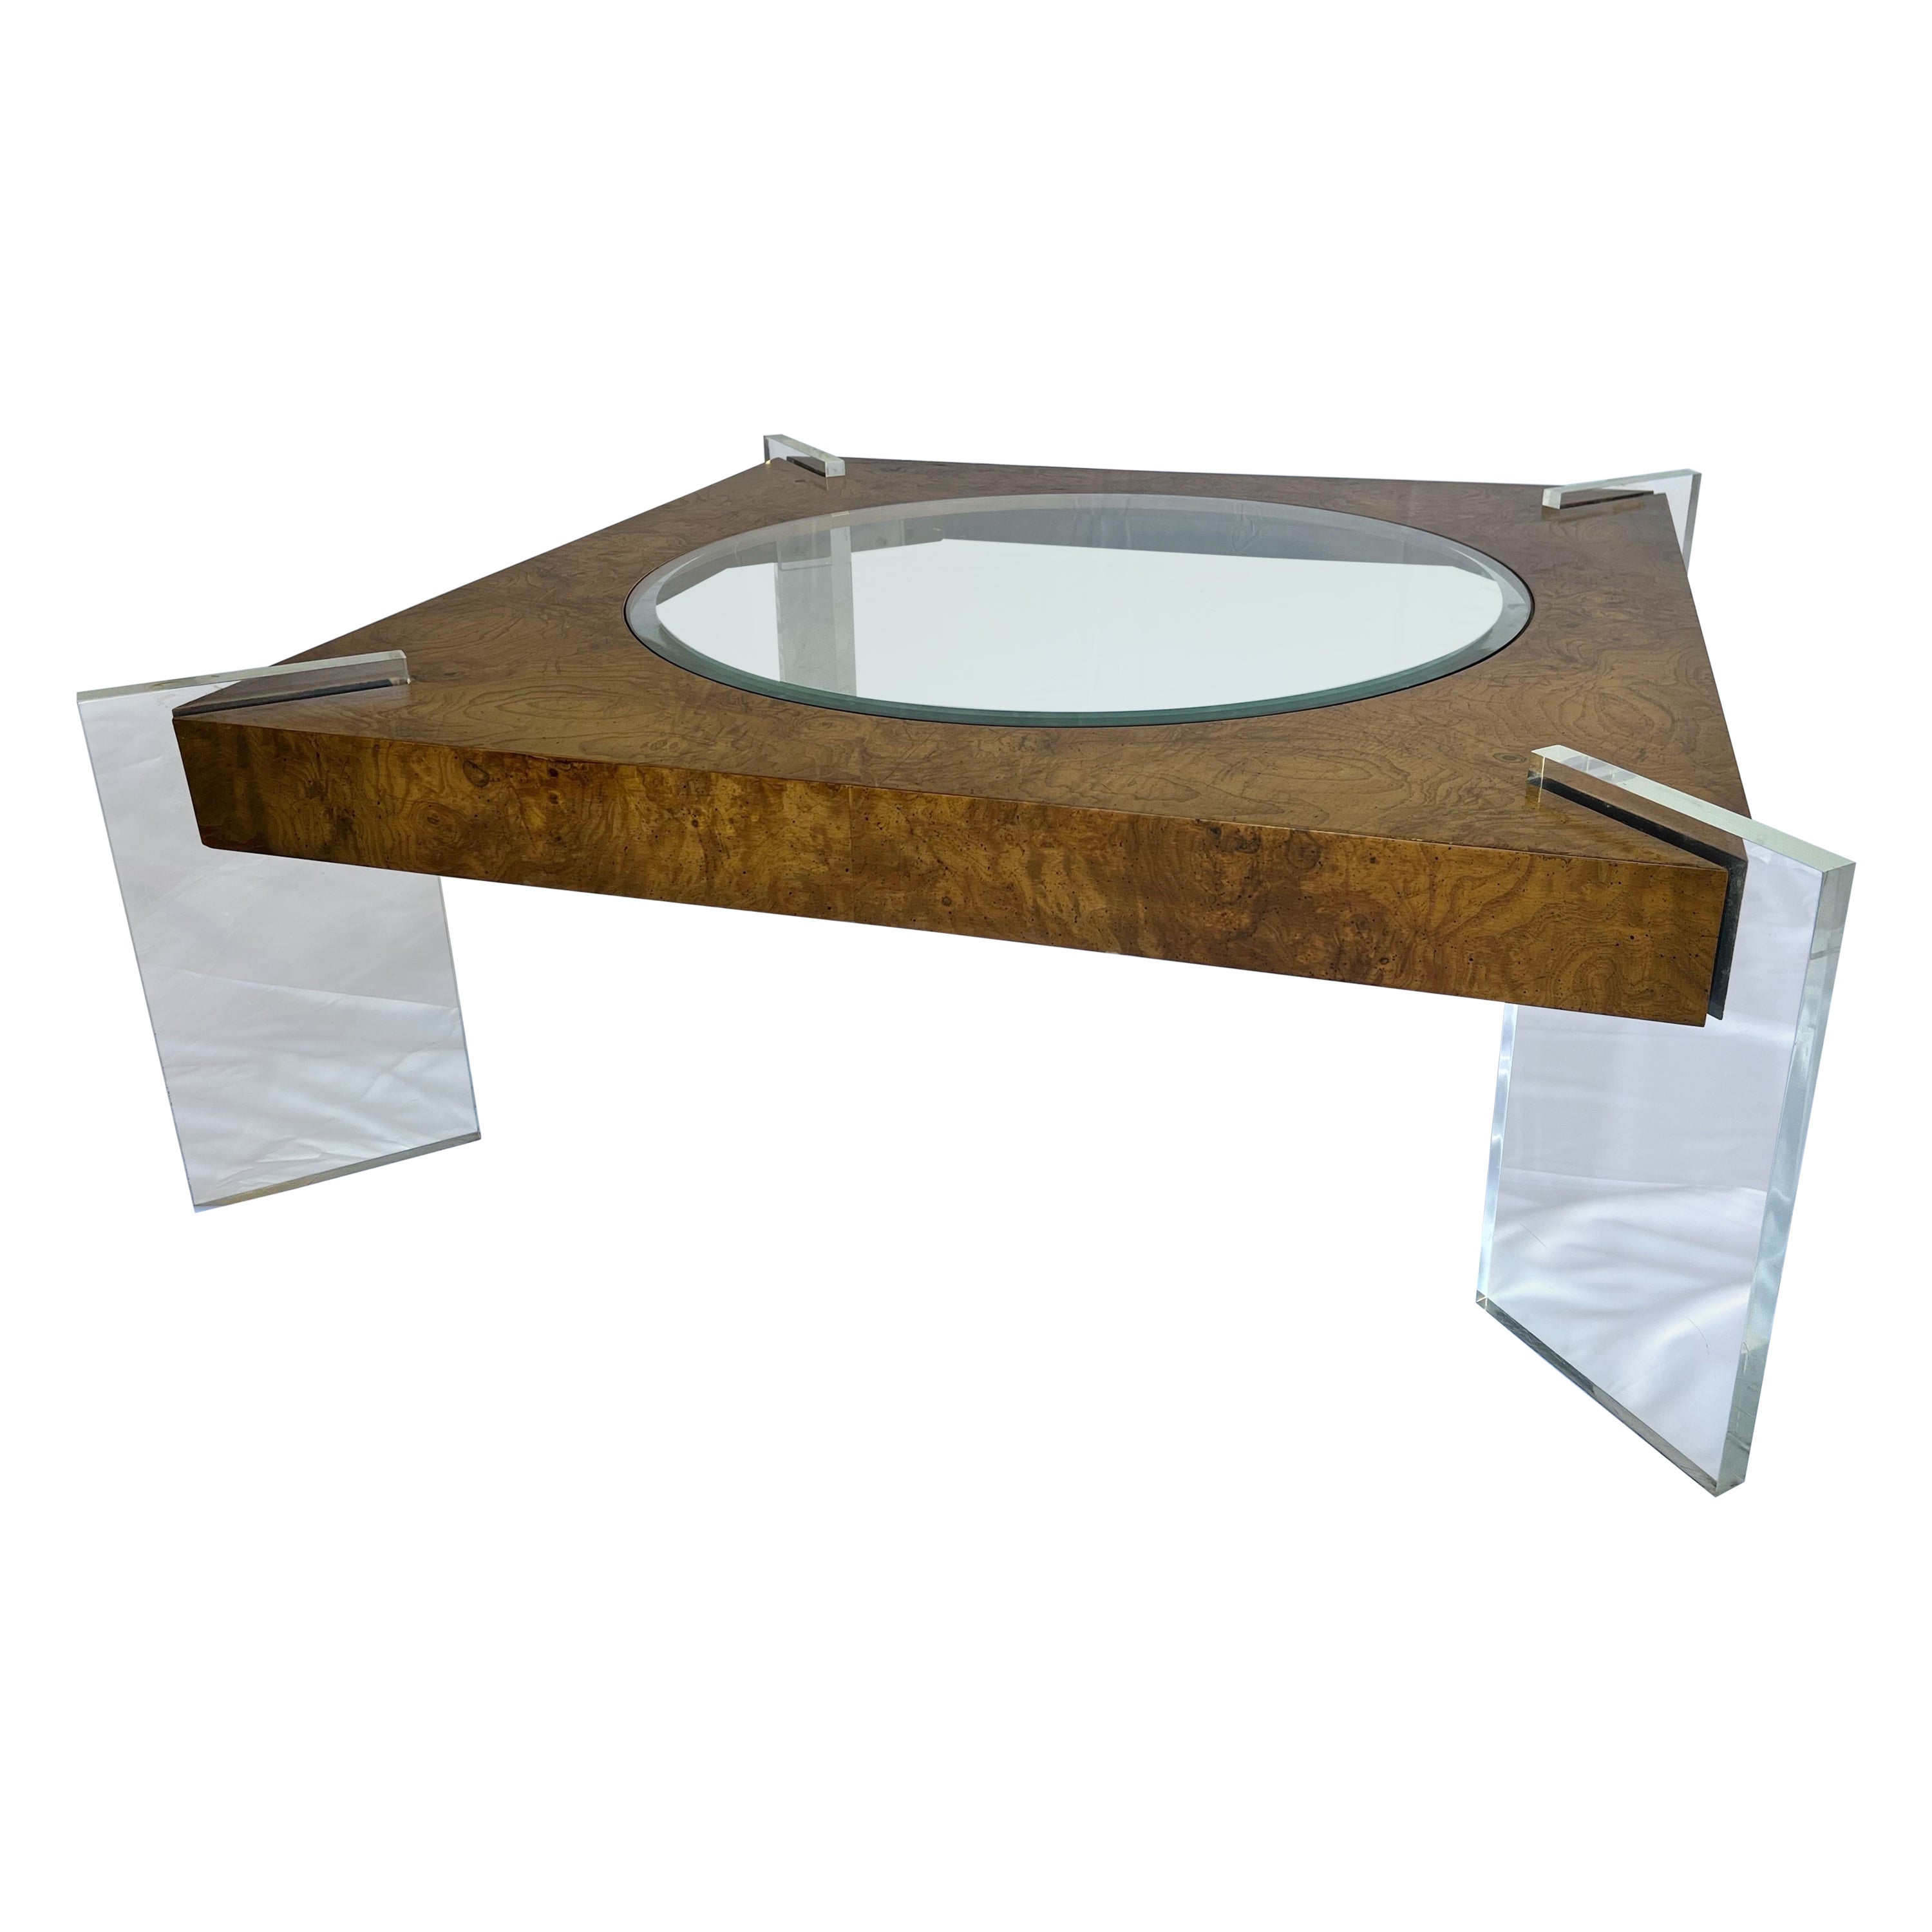 1970s Vladimir Kagan Burl Walnut, Lucite and Glass Low Table For Sale